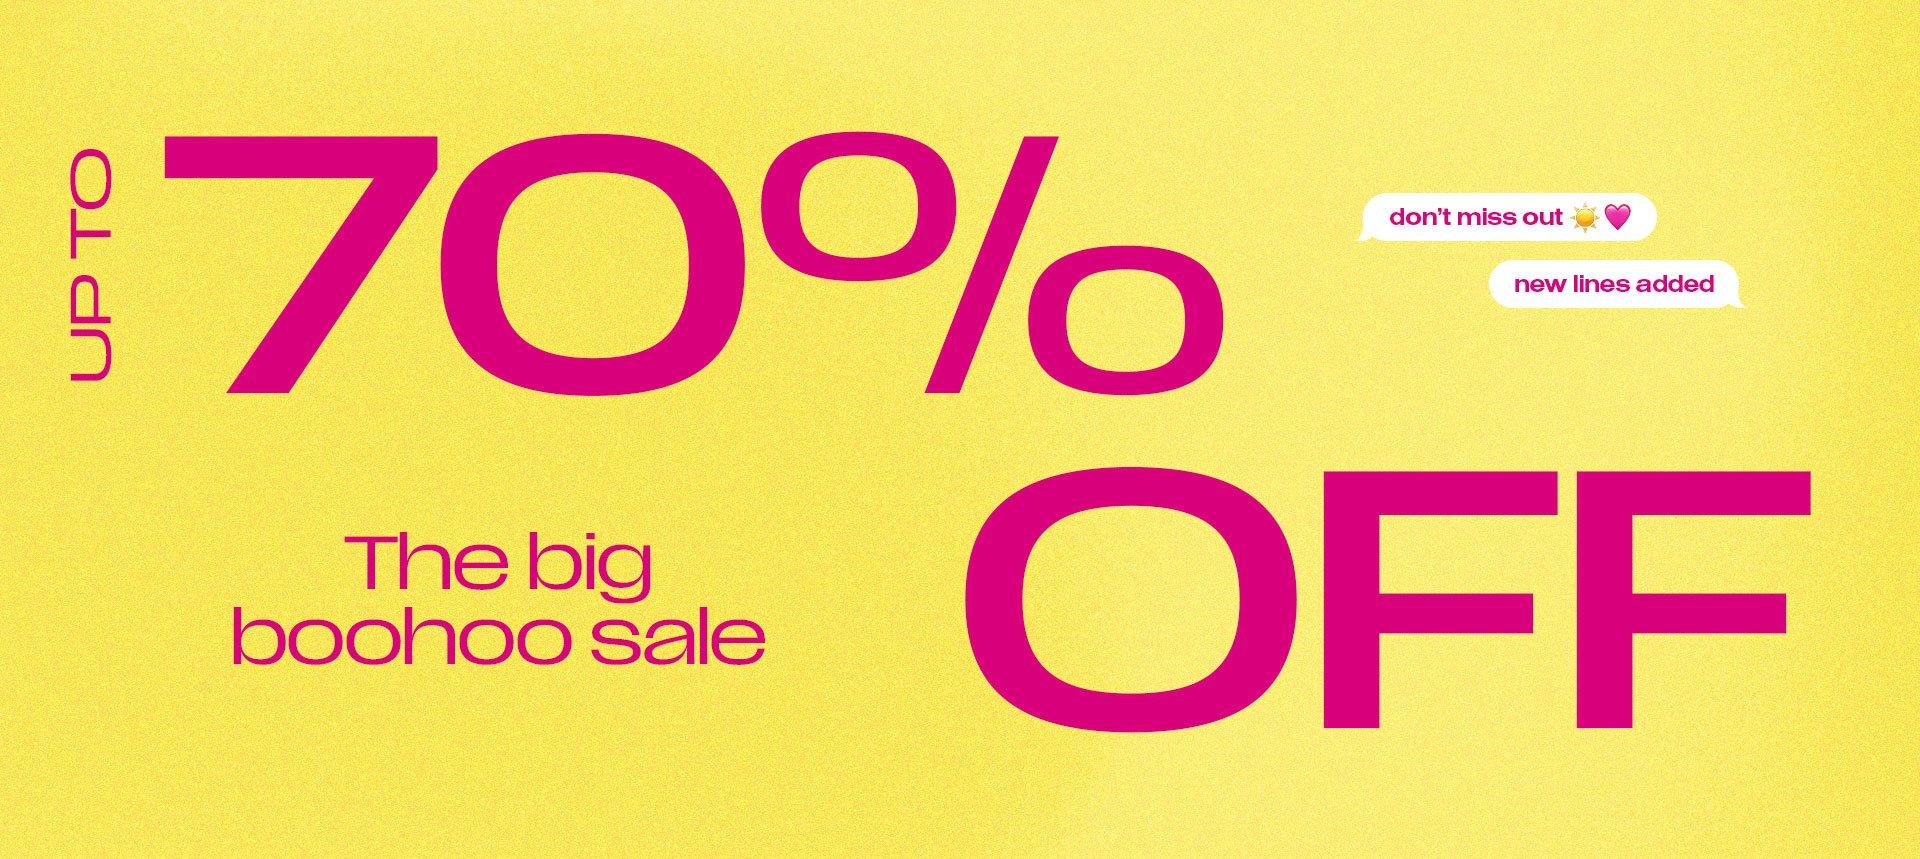 Up to 70% Off Everything!